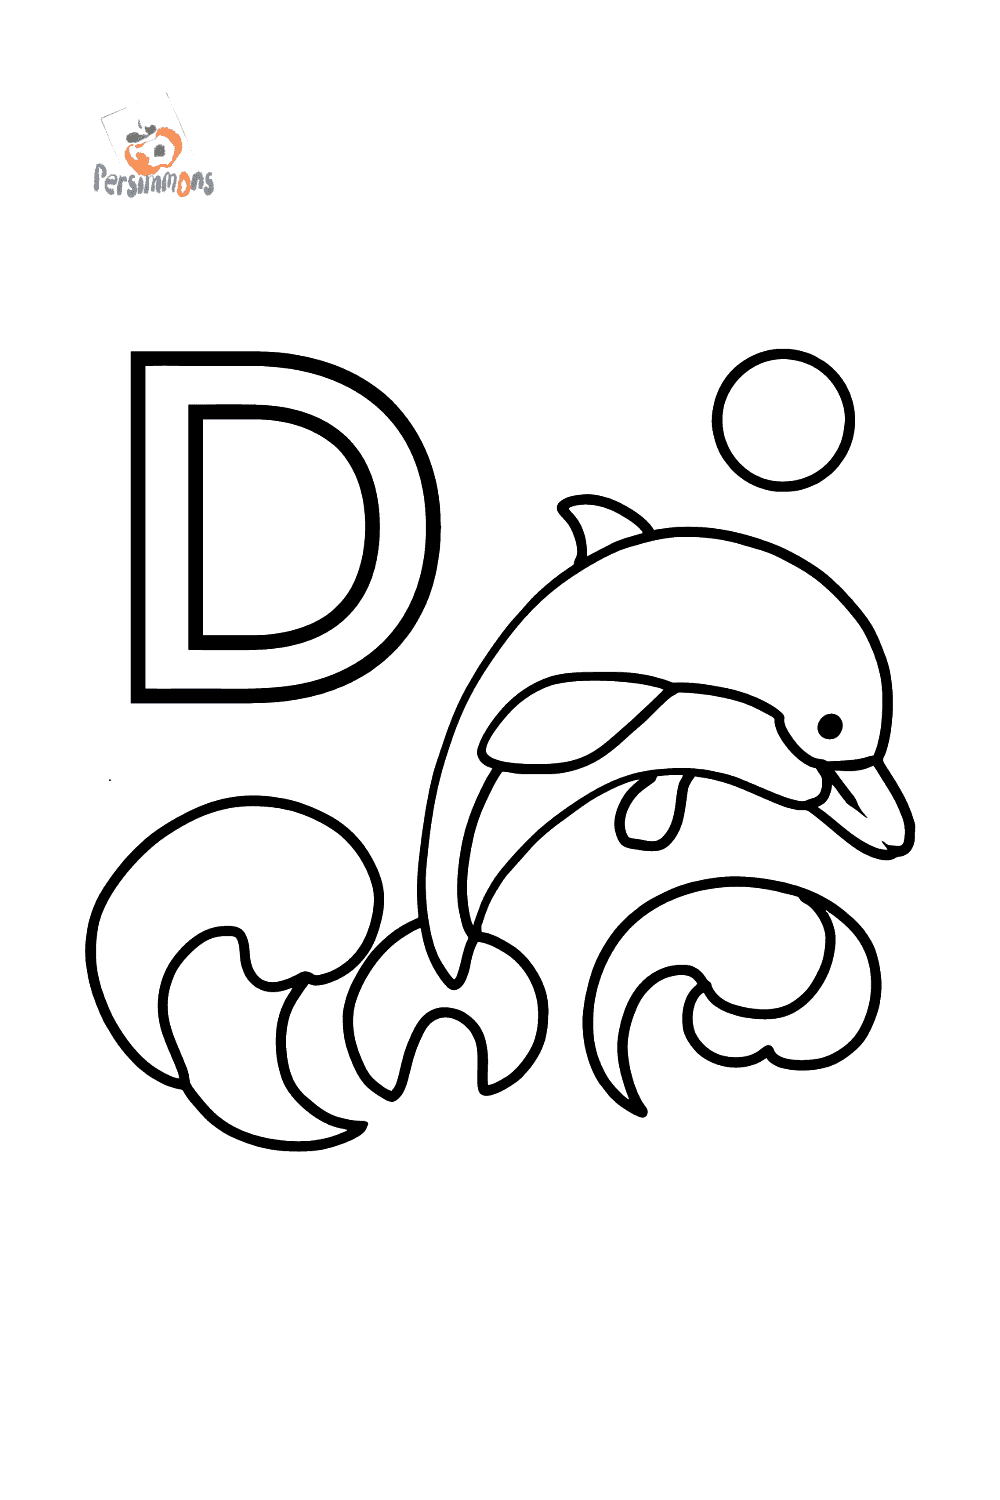 English Letter D coloring pages ♥ Free Online!